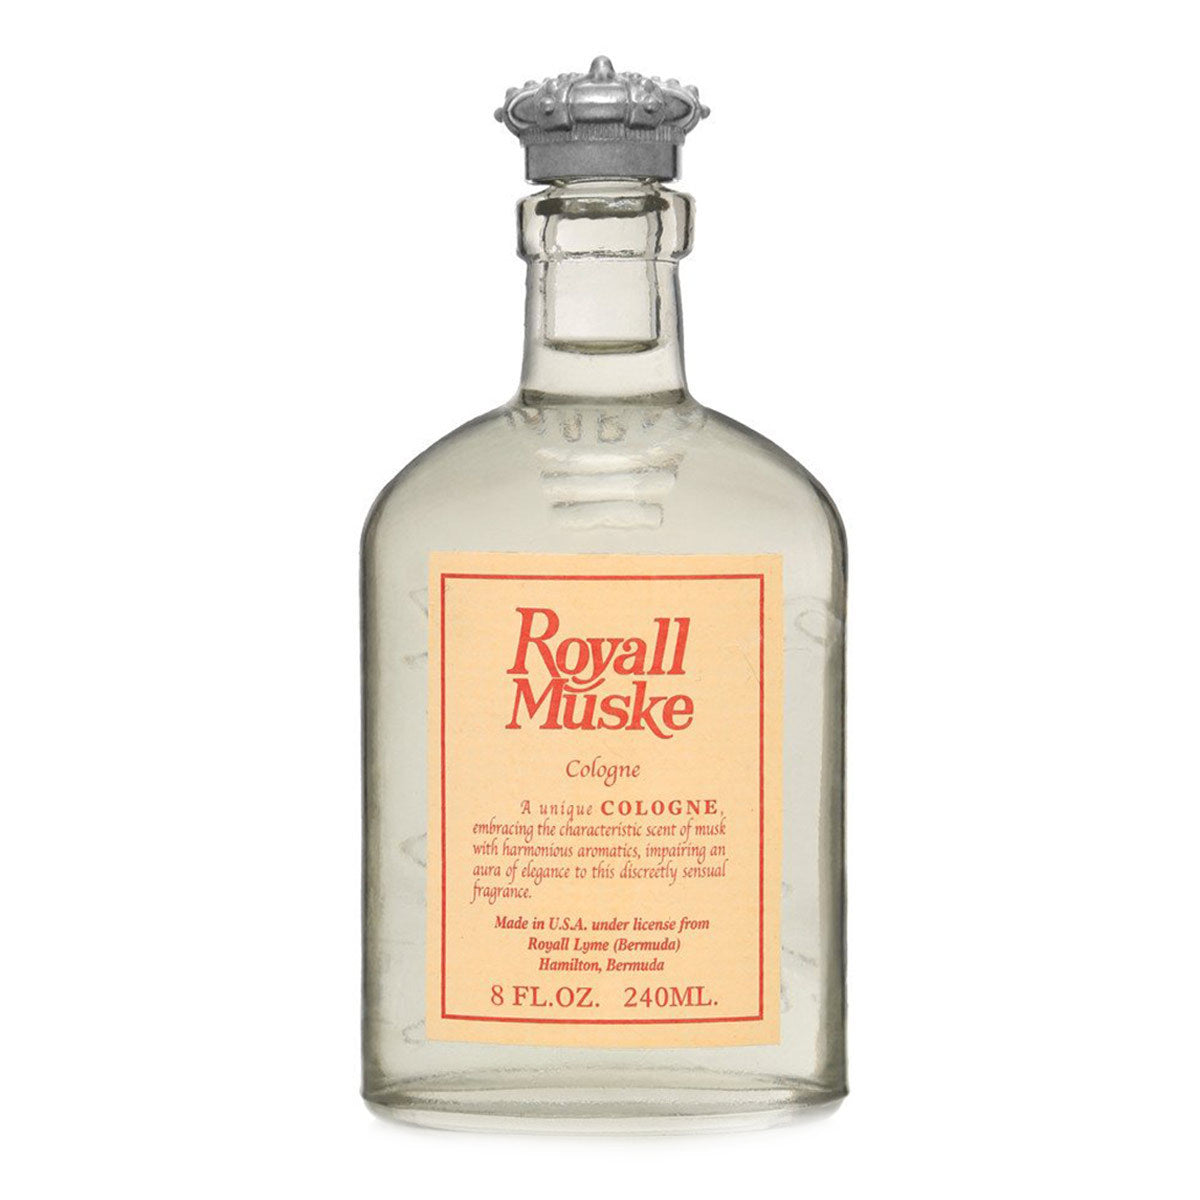 Primary image of Muske All Purpose Lotion